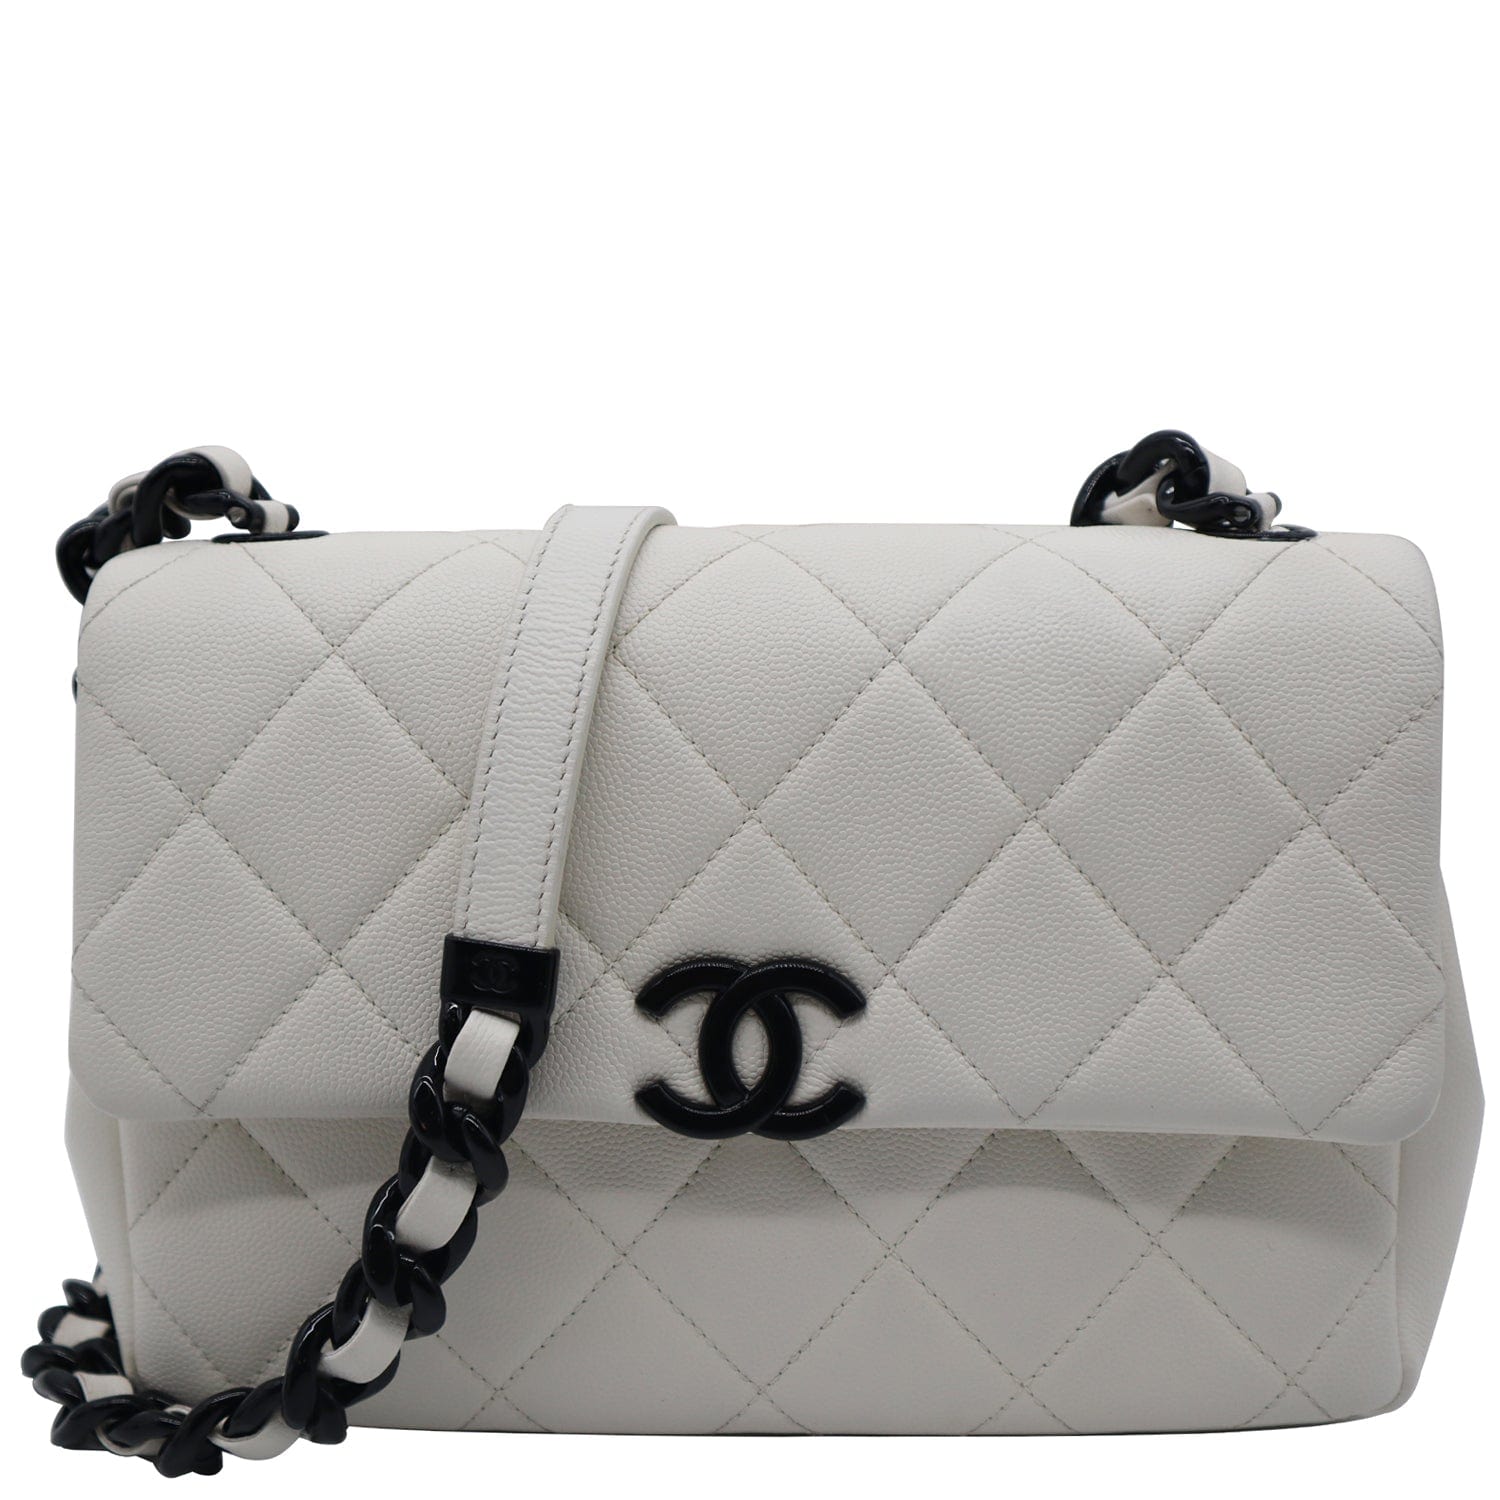 CHANEL  SQUARE QUILT WHITE LEATHER EW AND GOLDTONE METAL FLAP BAG   Chanel Handbags and Accessories  2020  Sothebys